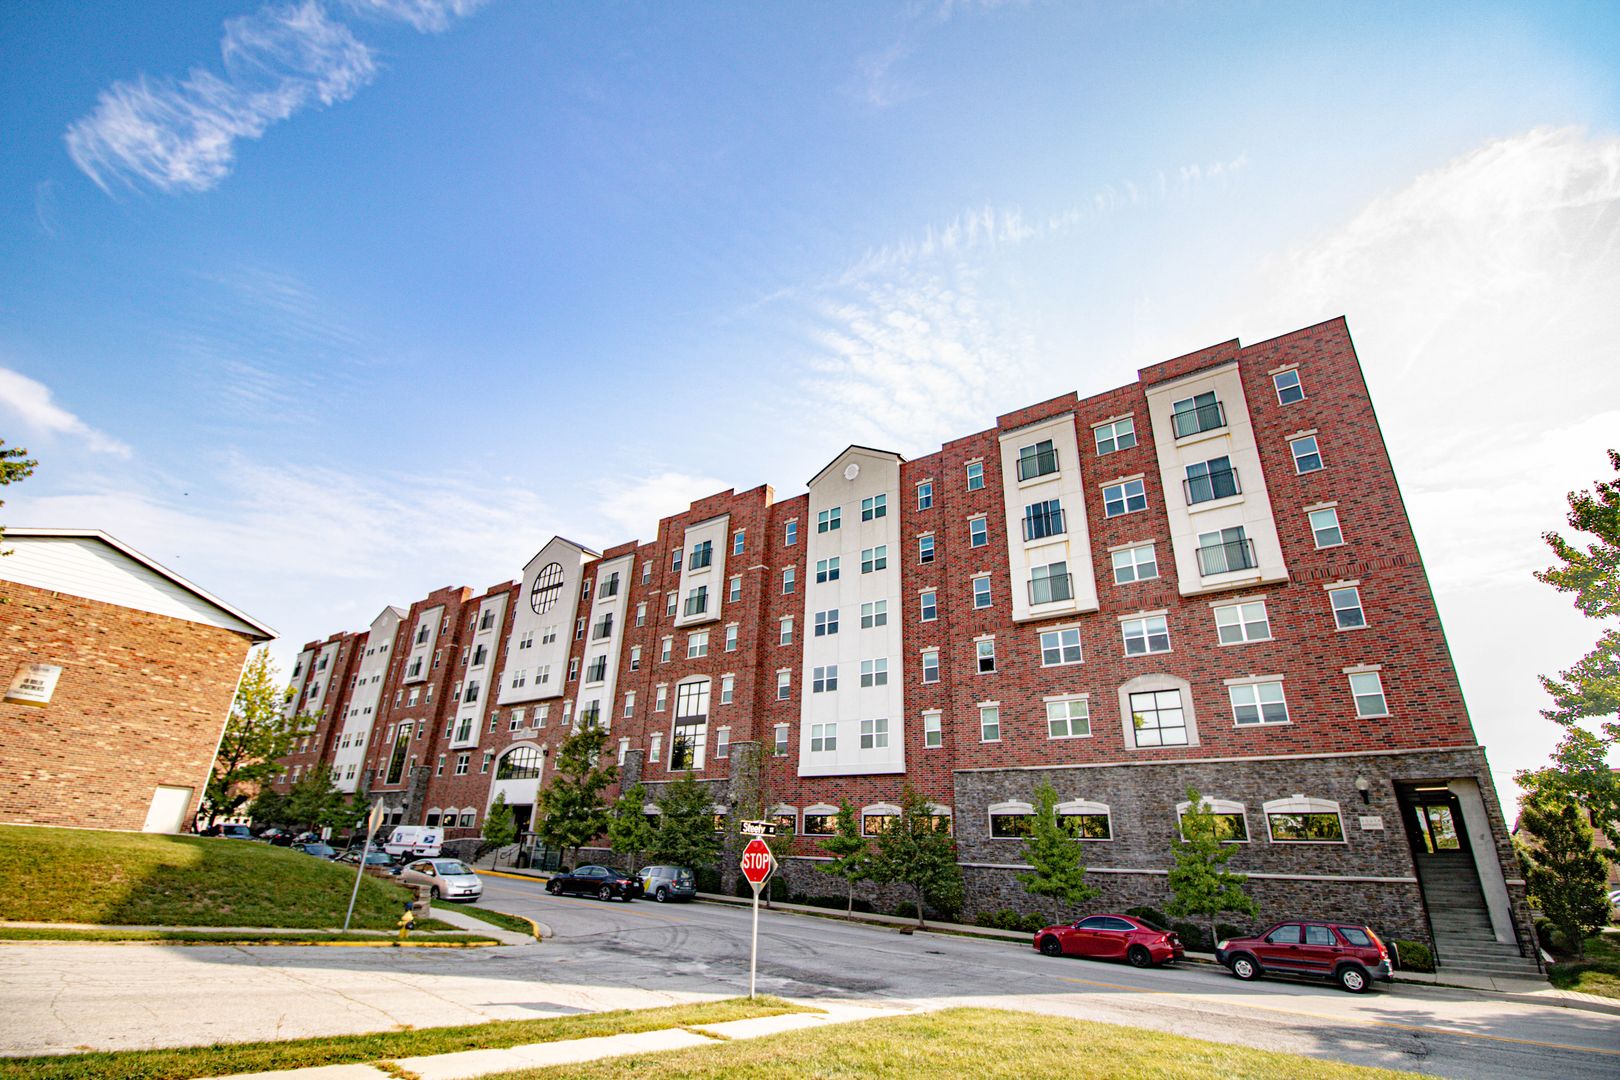 find-apartments/Grant-Street-Station/320-S.-Grant-Street,-623-West-Lafayette/2061